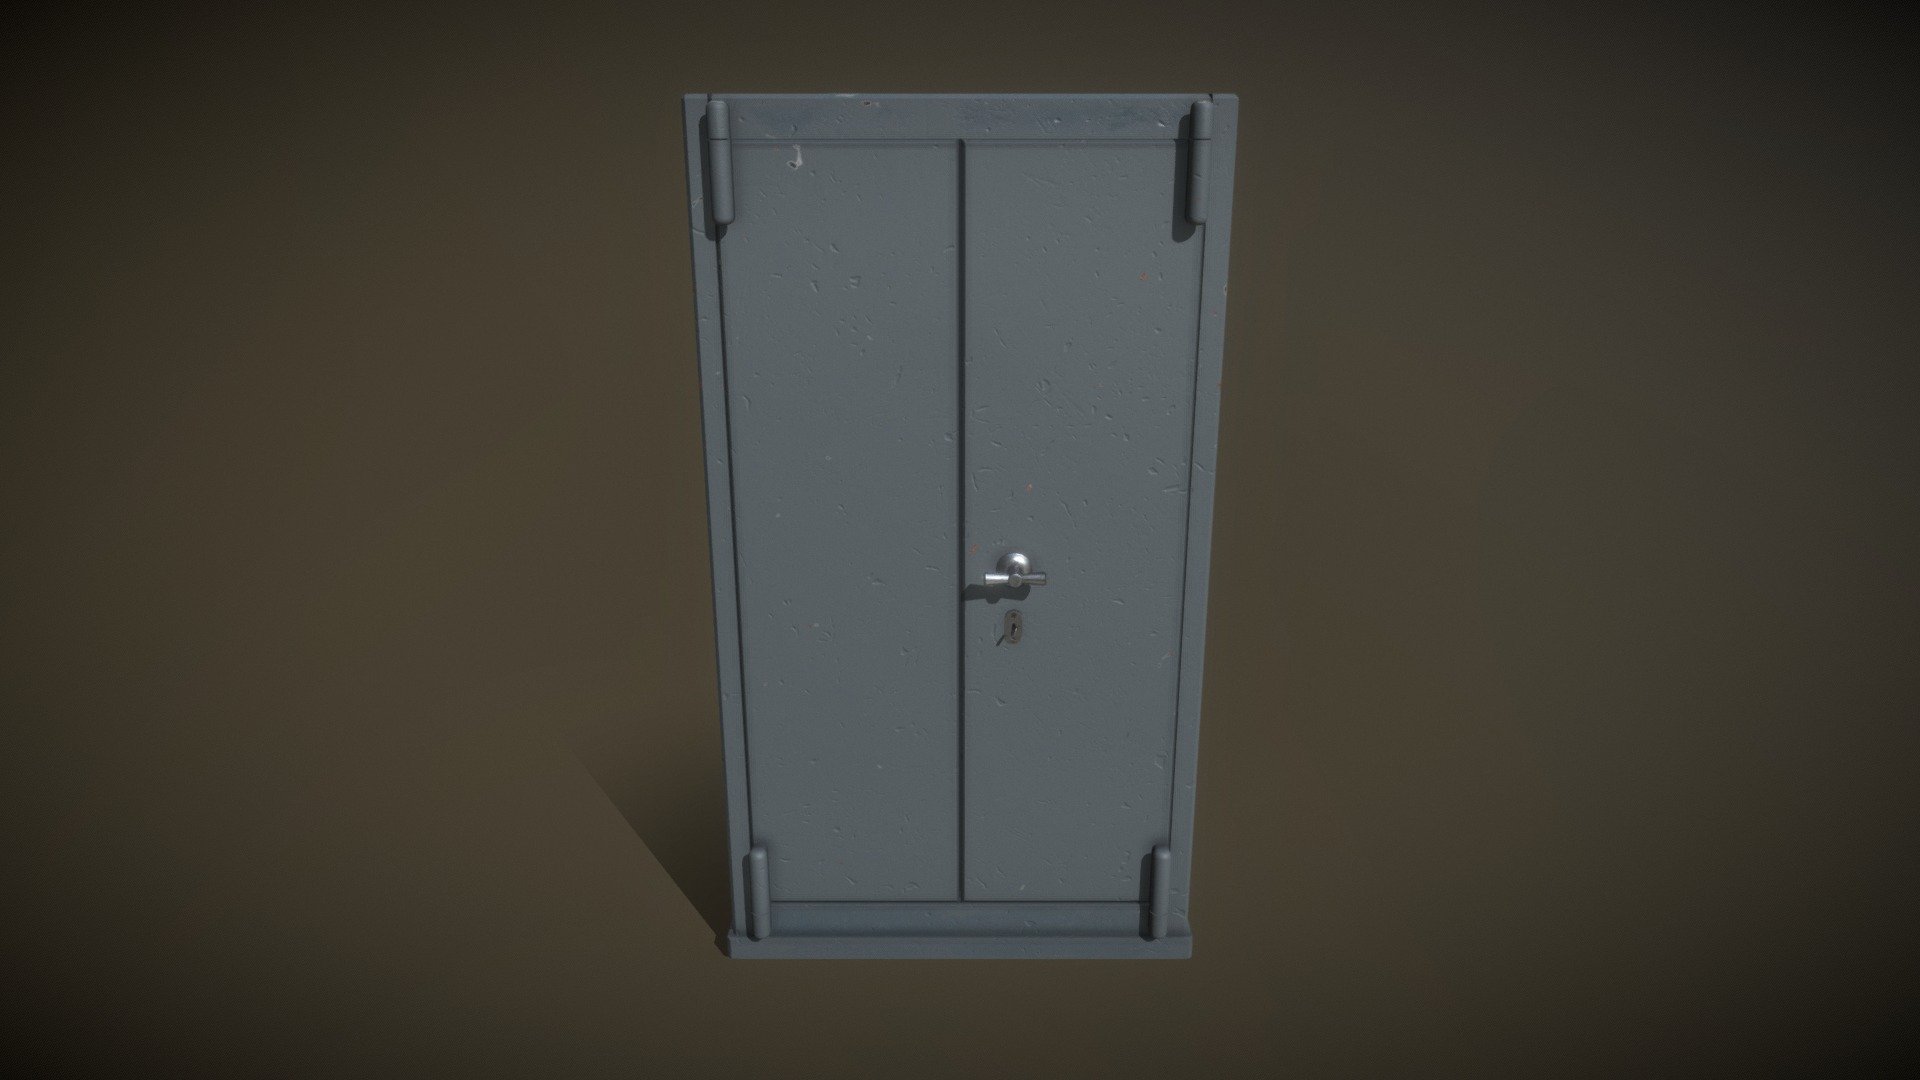 Heavy-armored cabinet that can serve as a safe storage for keeping firearms.

Content included in original files:


7 Meshes (Cabinet, Handle, Key, Bolts and Door)
4096x4096 PBR Material (Albedo + Occlusion-Roughness-Metallic + OpenGL Normal)
Skeleton with One Bone for Each Mesh
Animation Loop with Open and Close Actions

Modeled and Animated in Blender 2.92. Textured using Substance Painter 2019 3d model